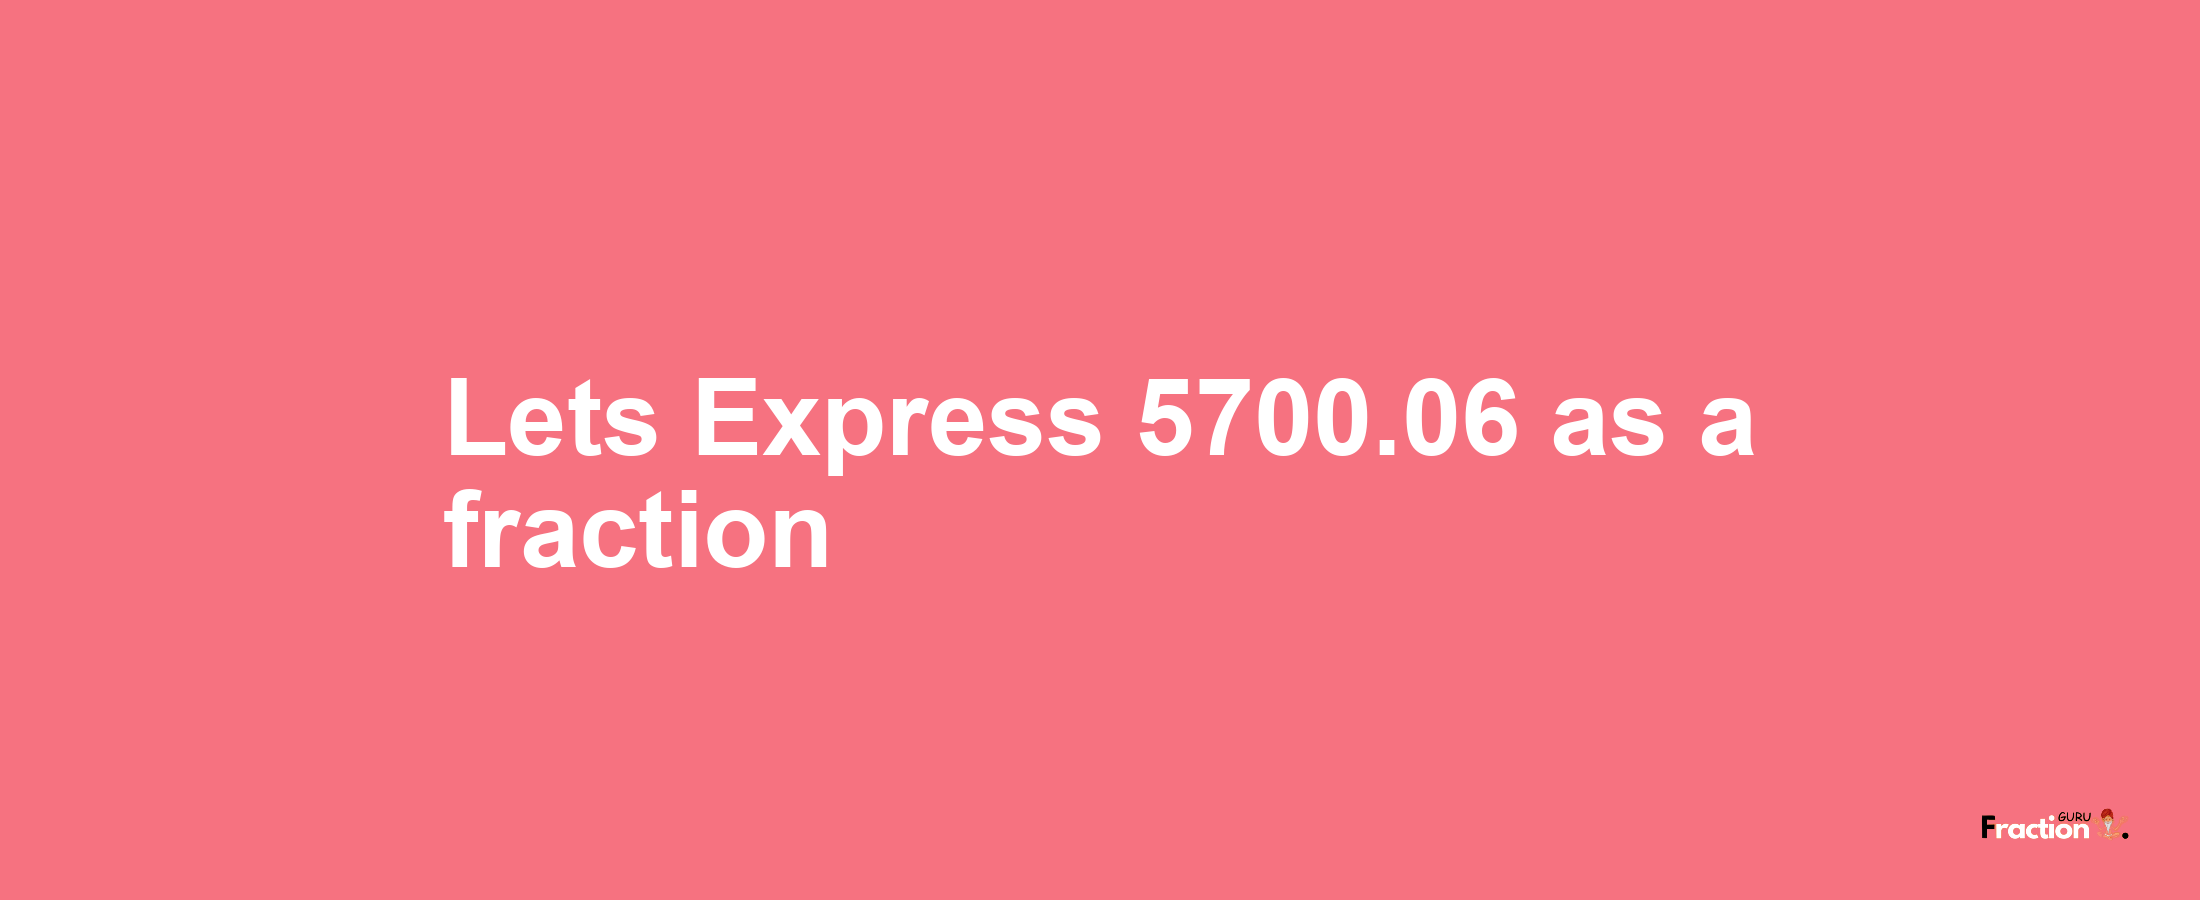 Lets Express 5700.06 as afraction